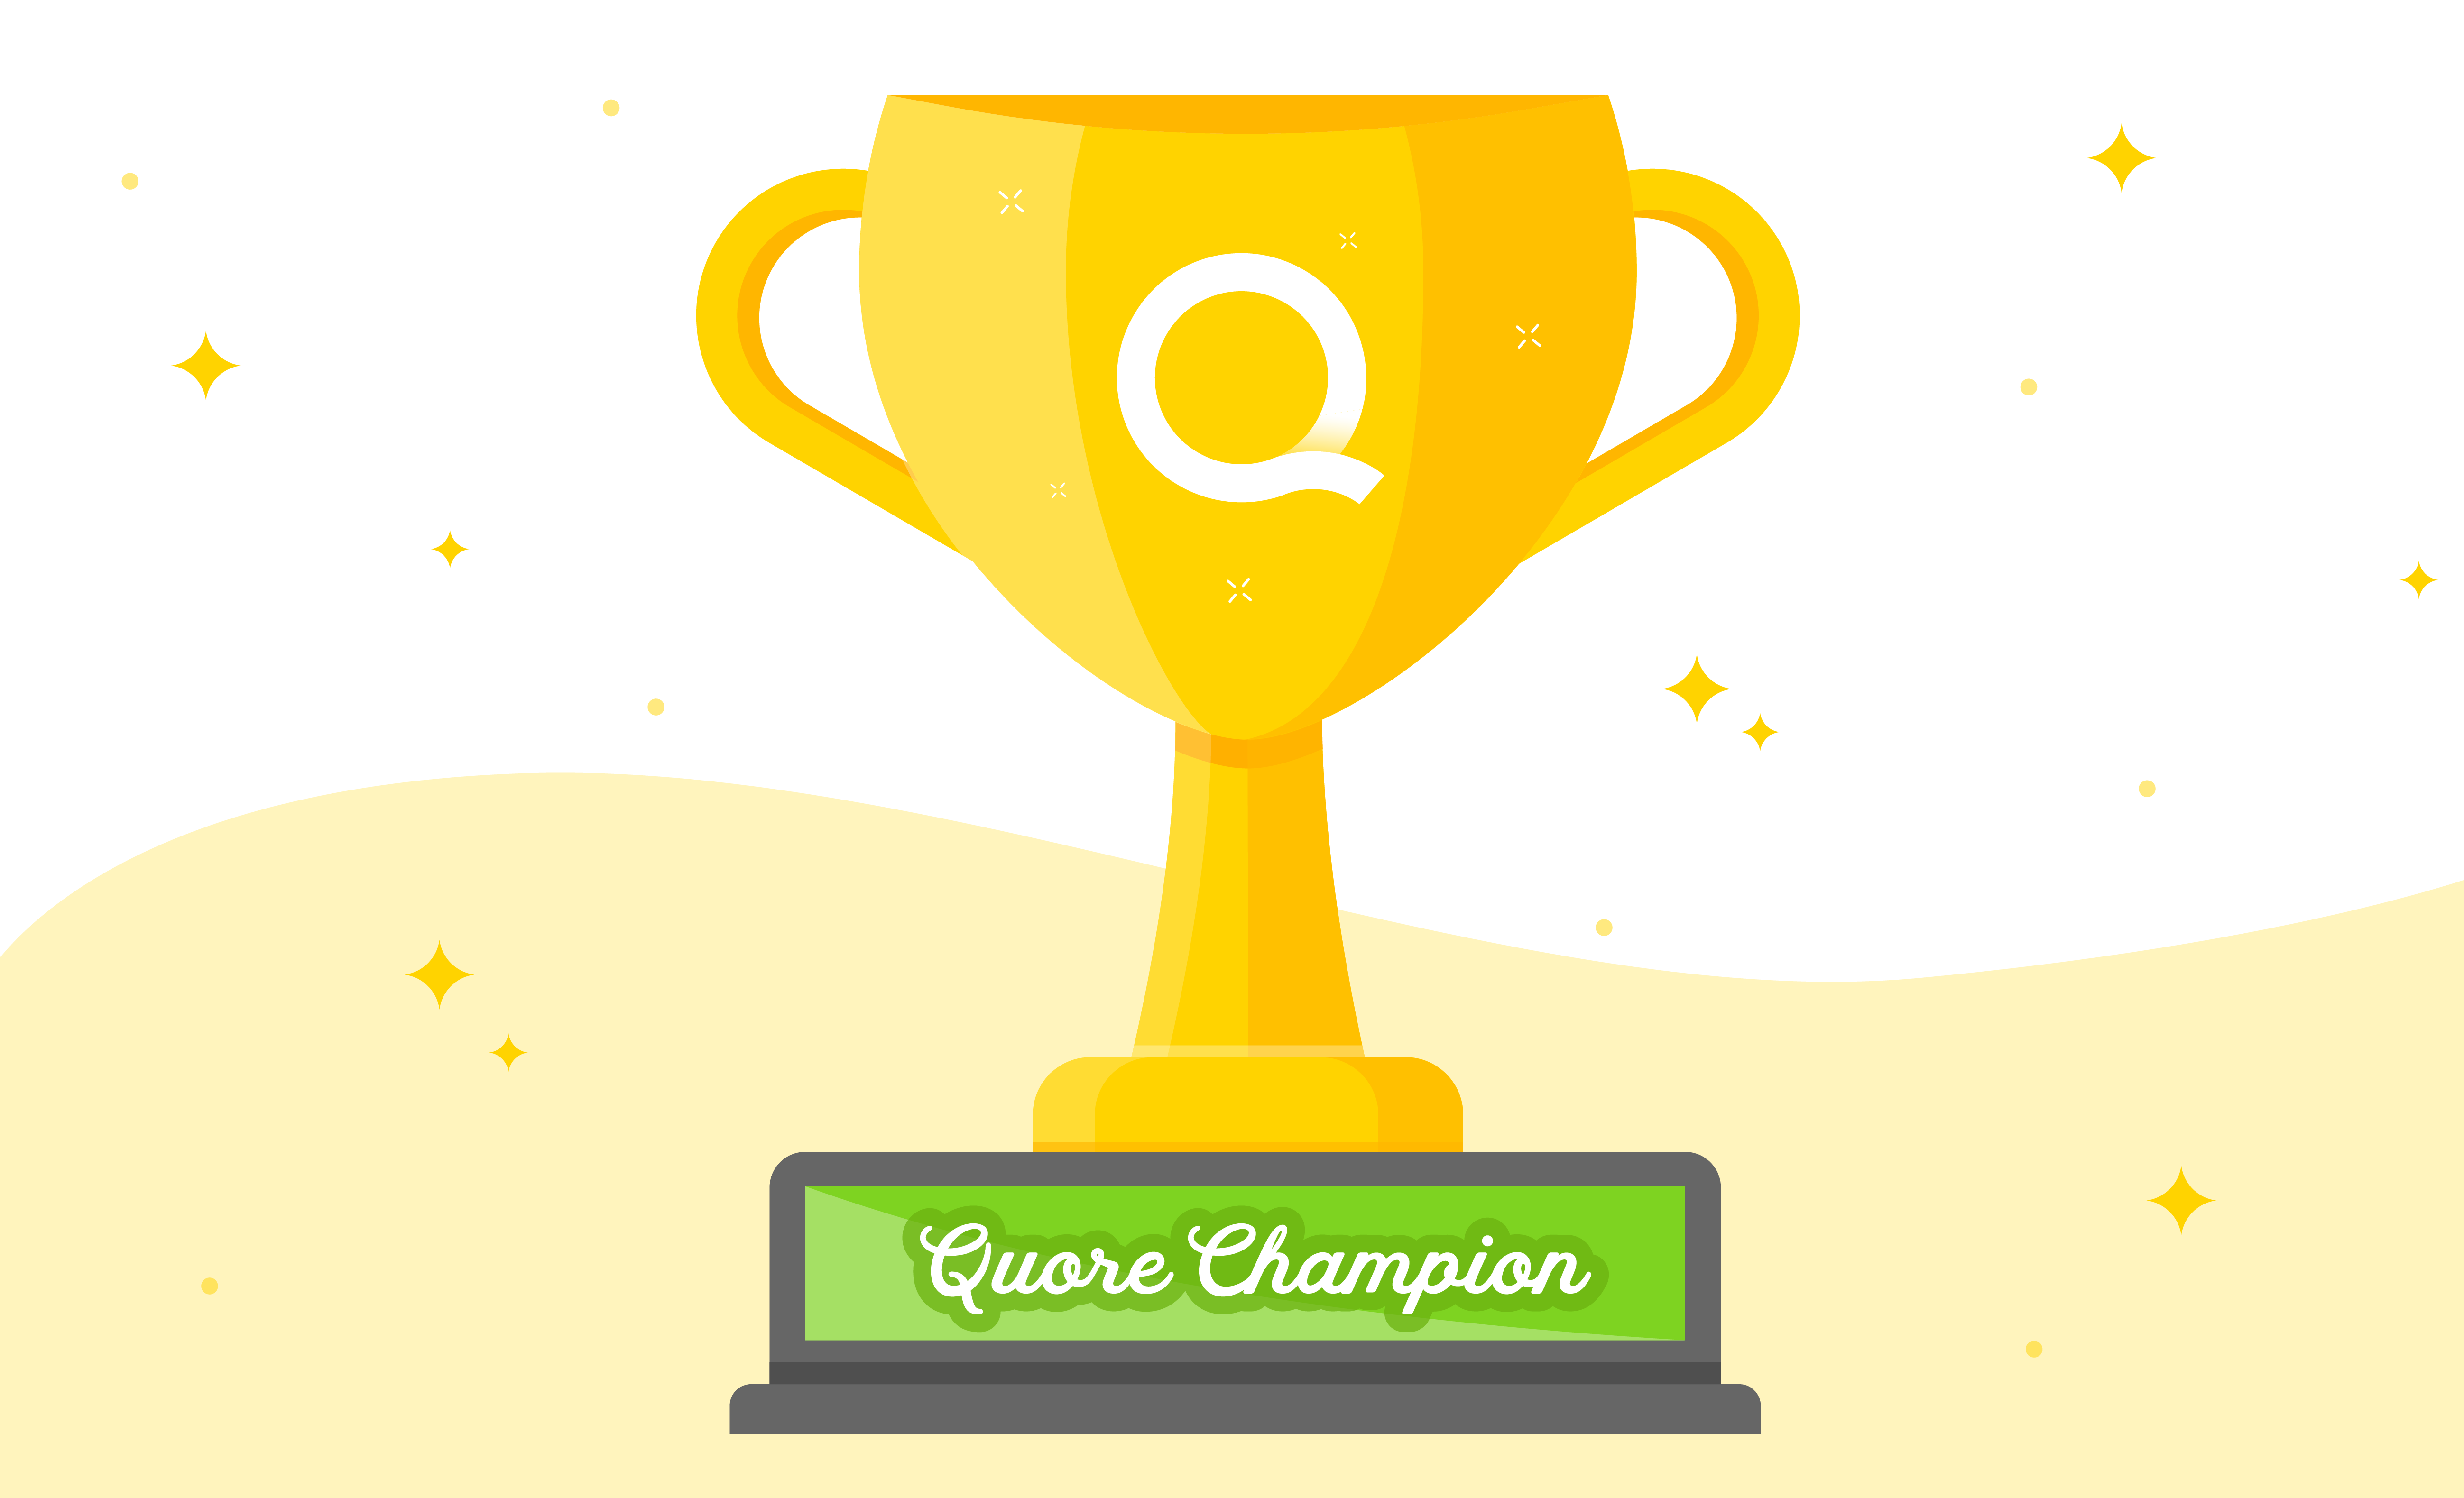 Finding Your Hotel’s Quore Champion